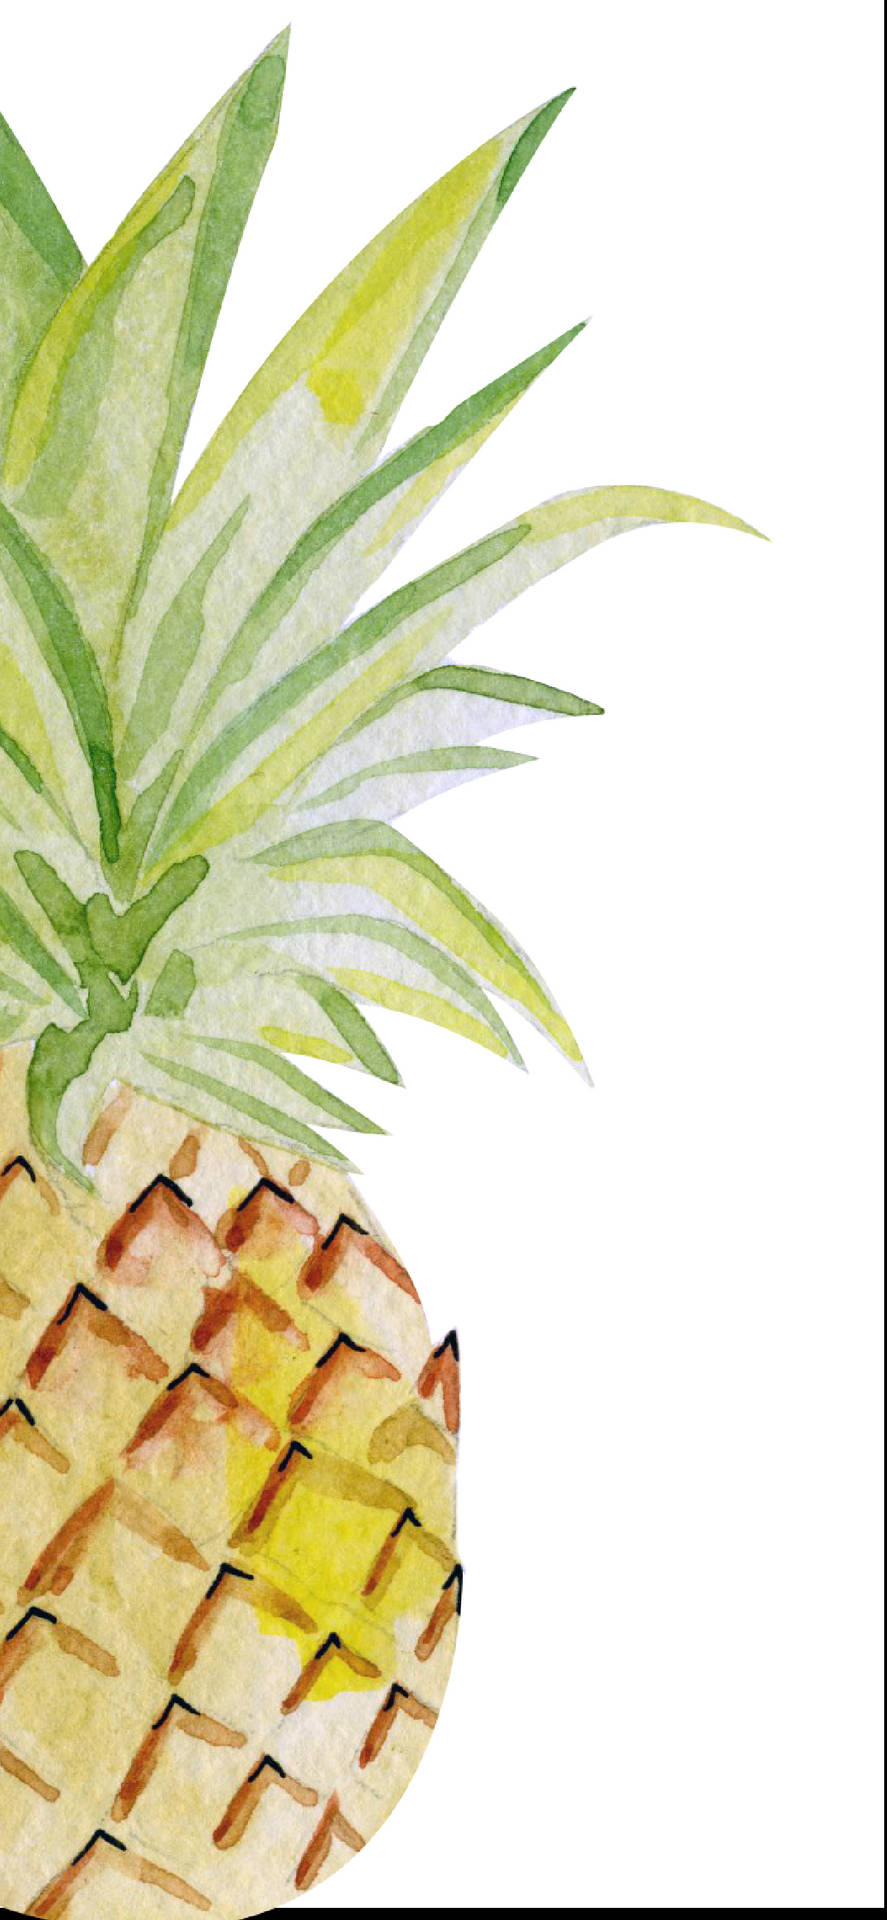 Upgrade your phone with this stylish pineapple adorned iPhone. Wallpaper